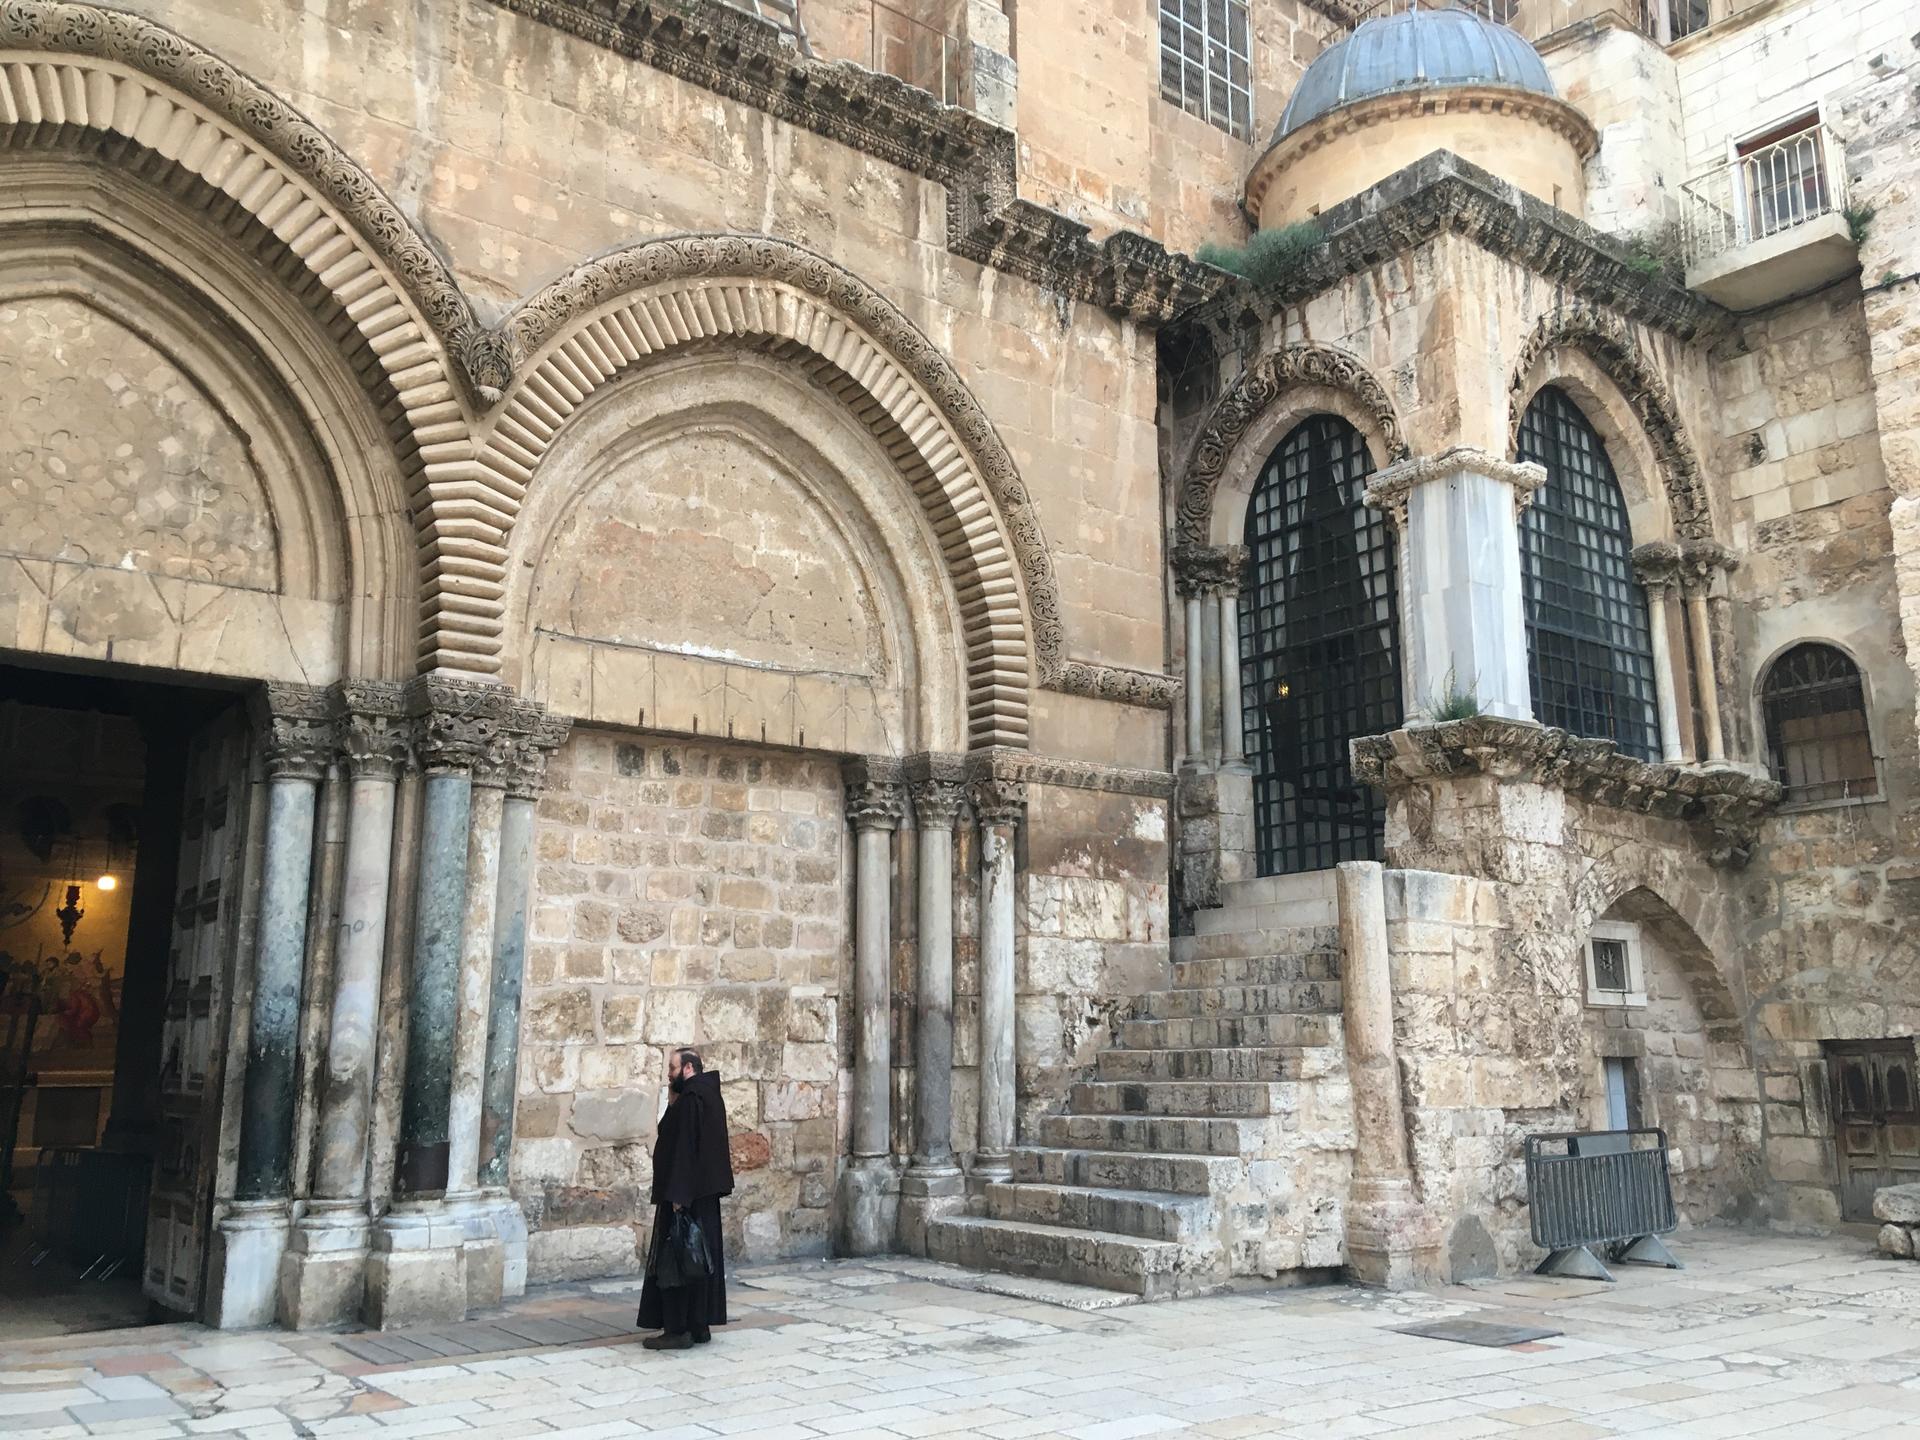 The Church of the Holy Sepulchre was mostly empty on a recent Sunday.